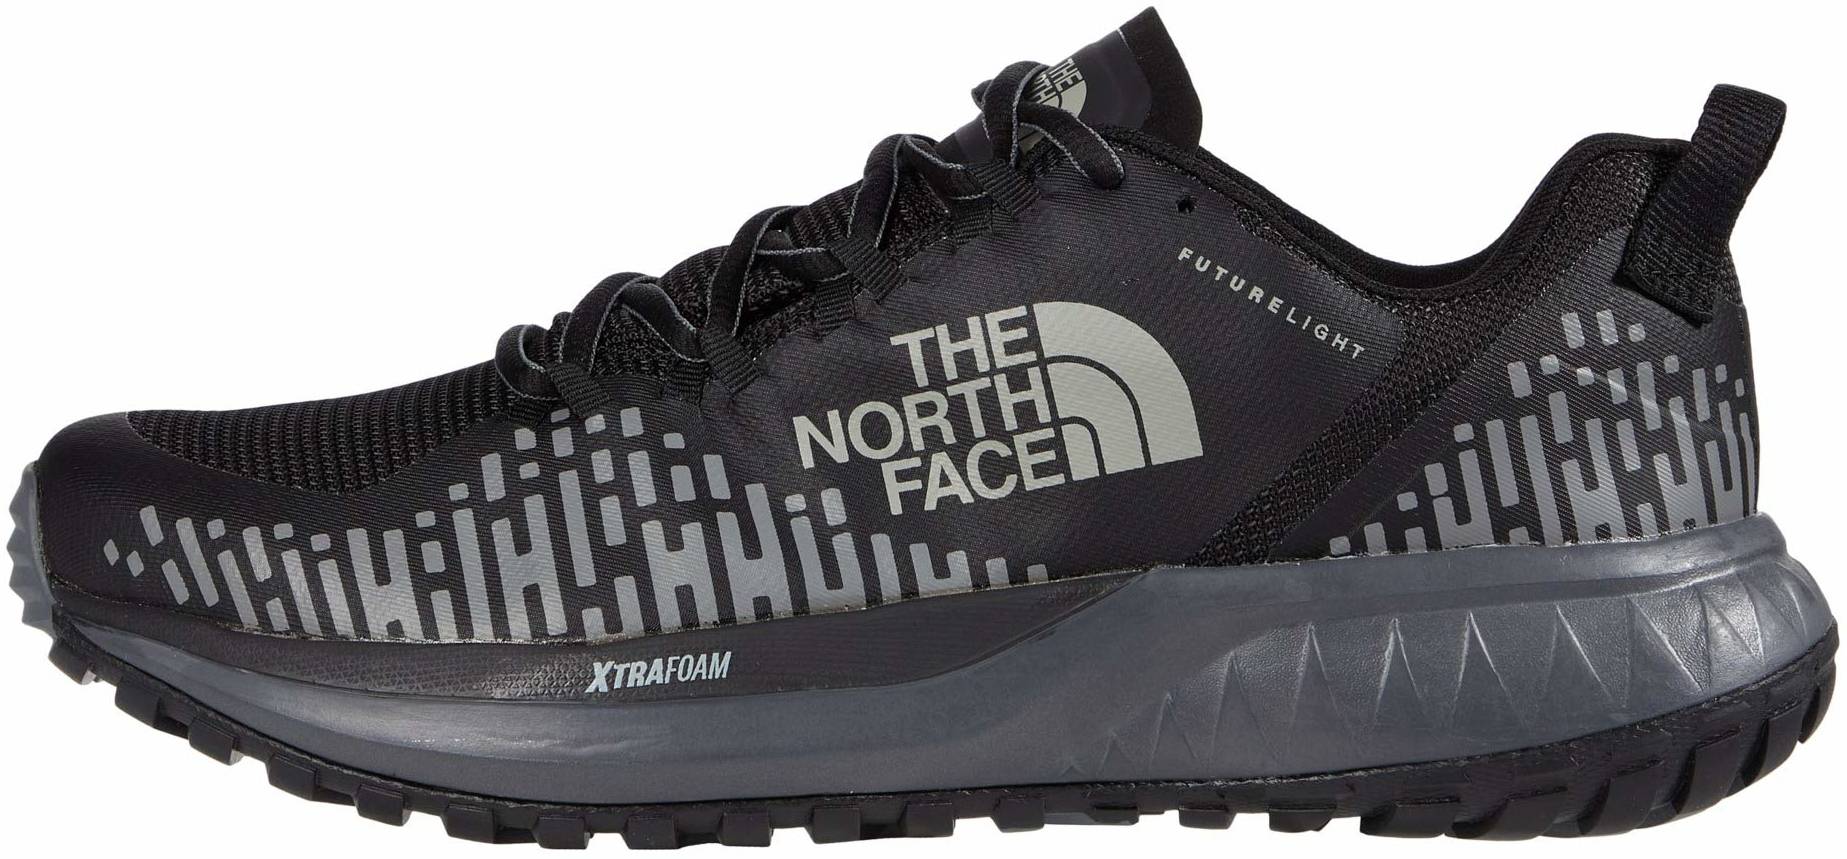 Only $149 + Review of The North Face 